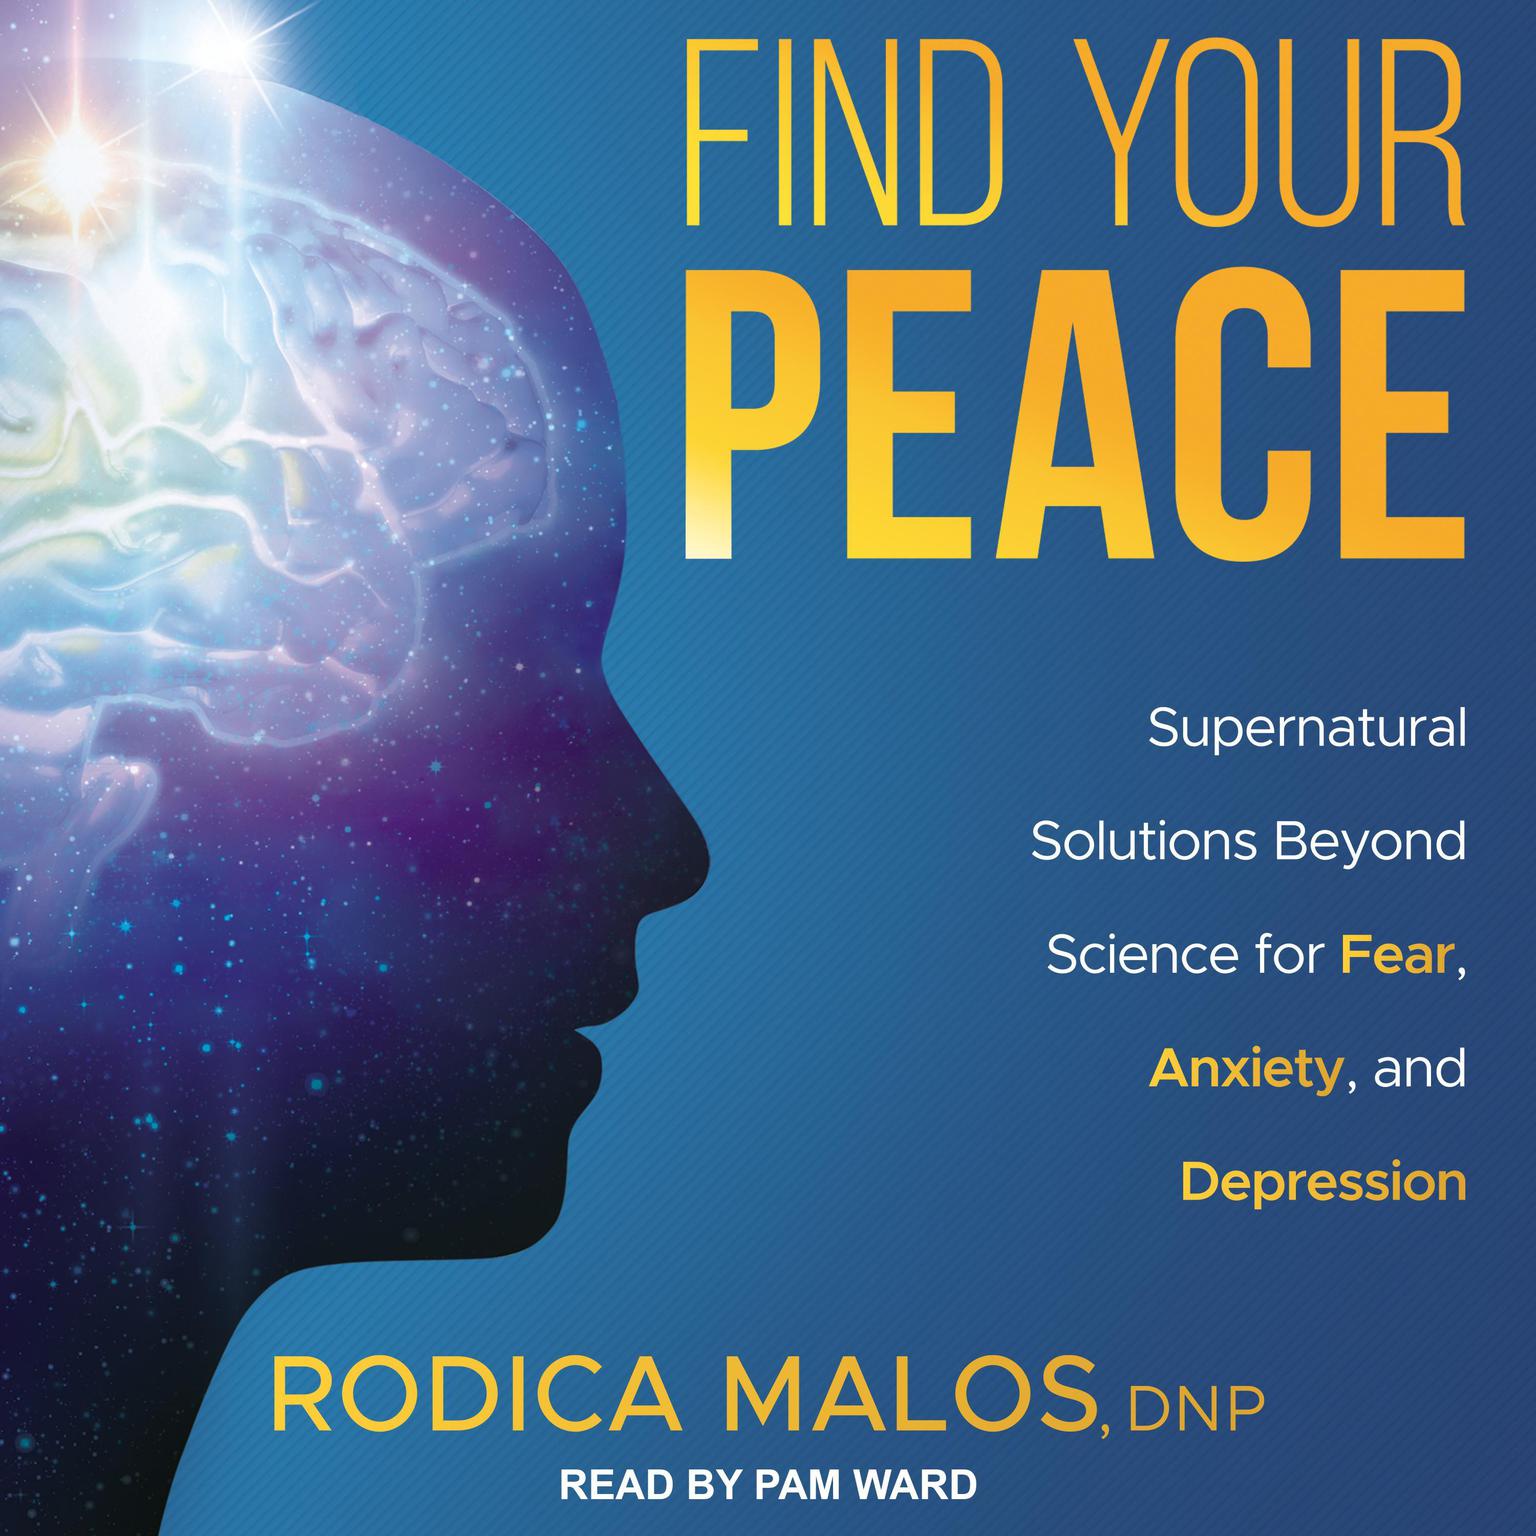 Find Your Peace: Supernatural Solutions Beyond Science for Fear, Anxiety, and Depression Audiobook, by Rodica Malos